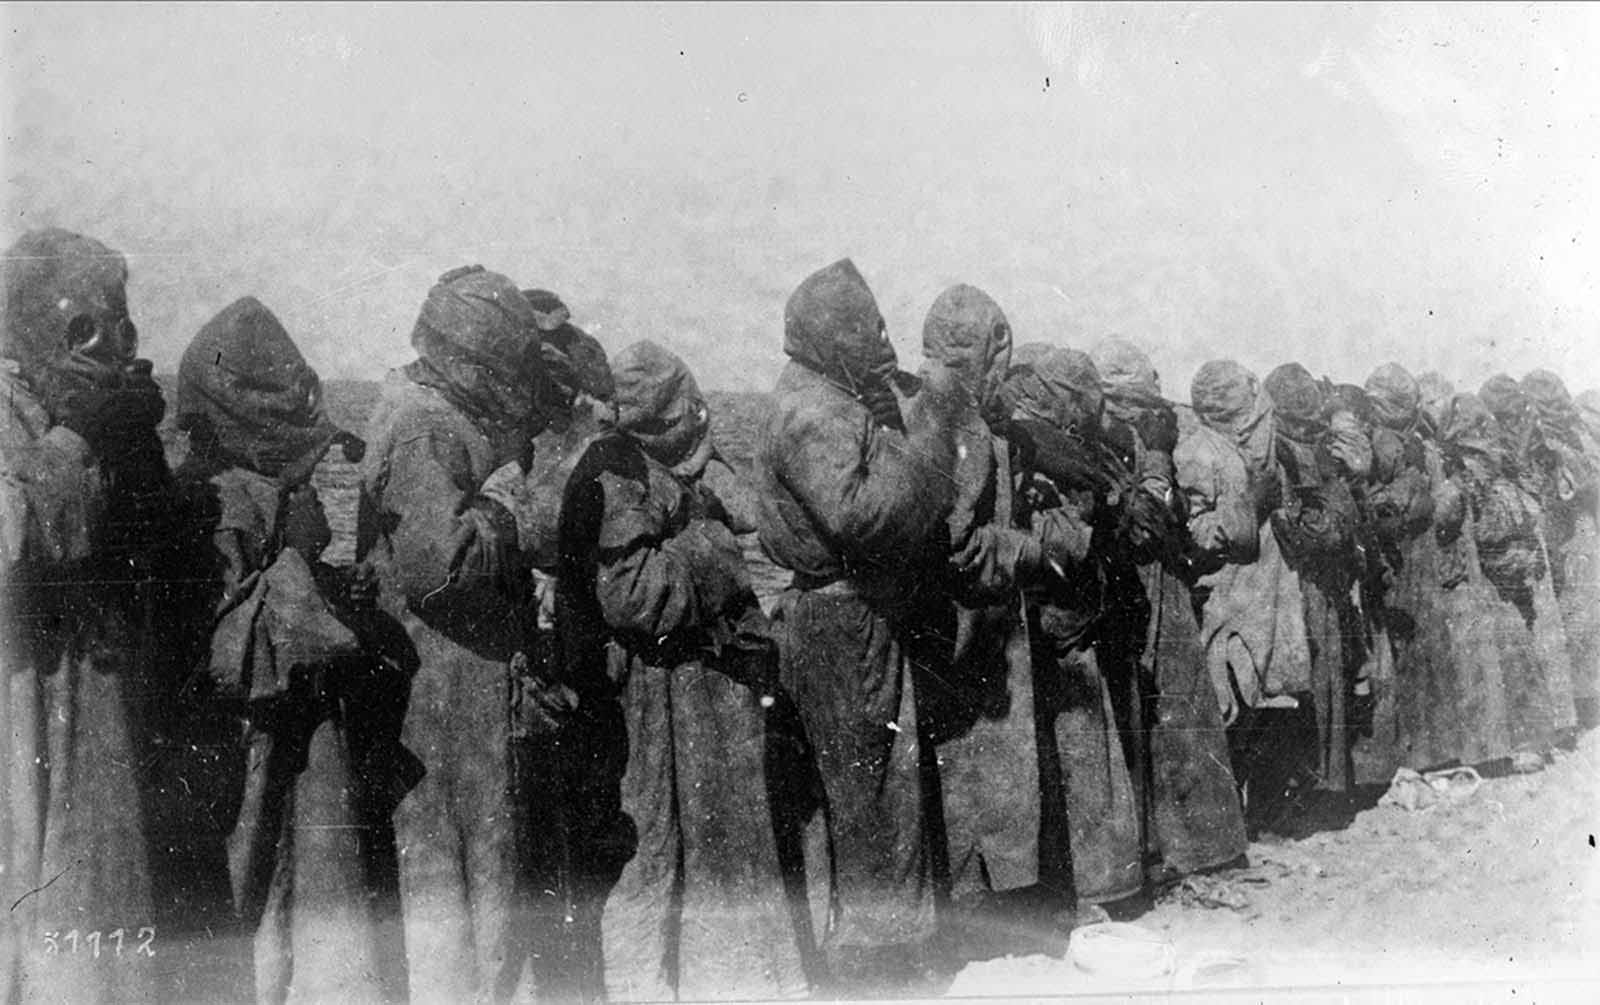 Gas masks in use in Mesopotamia in 1918